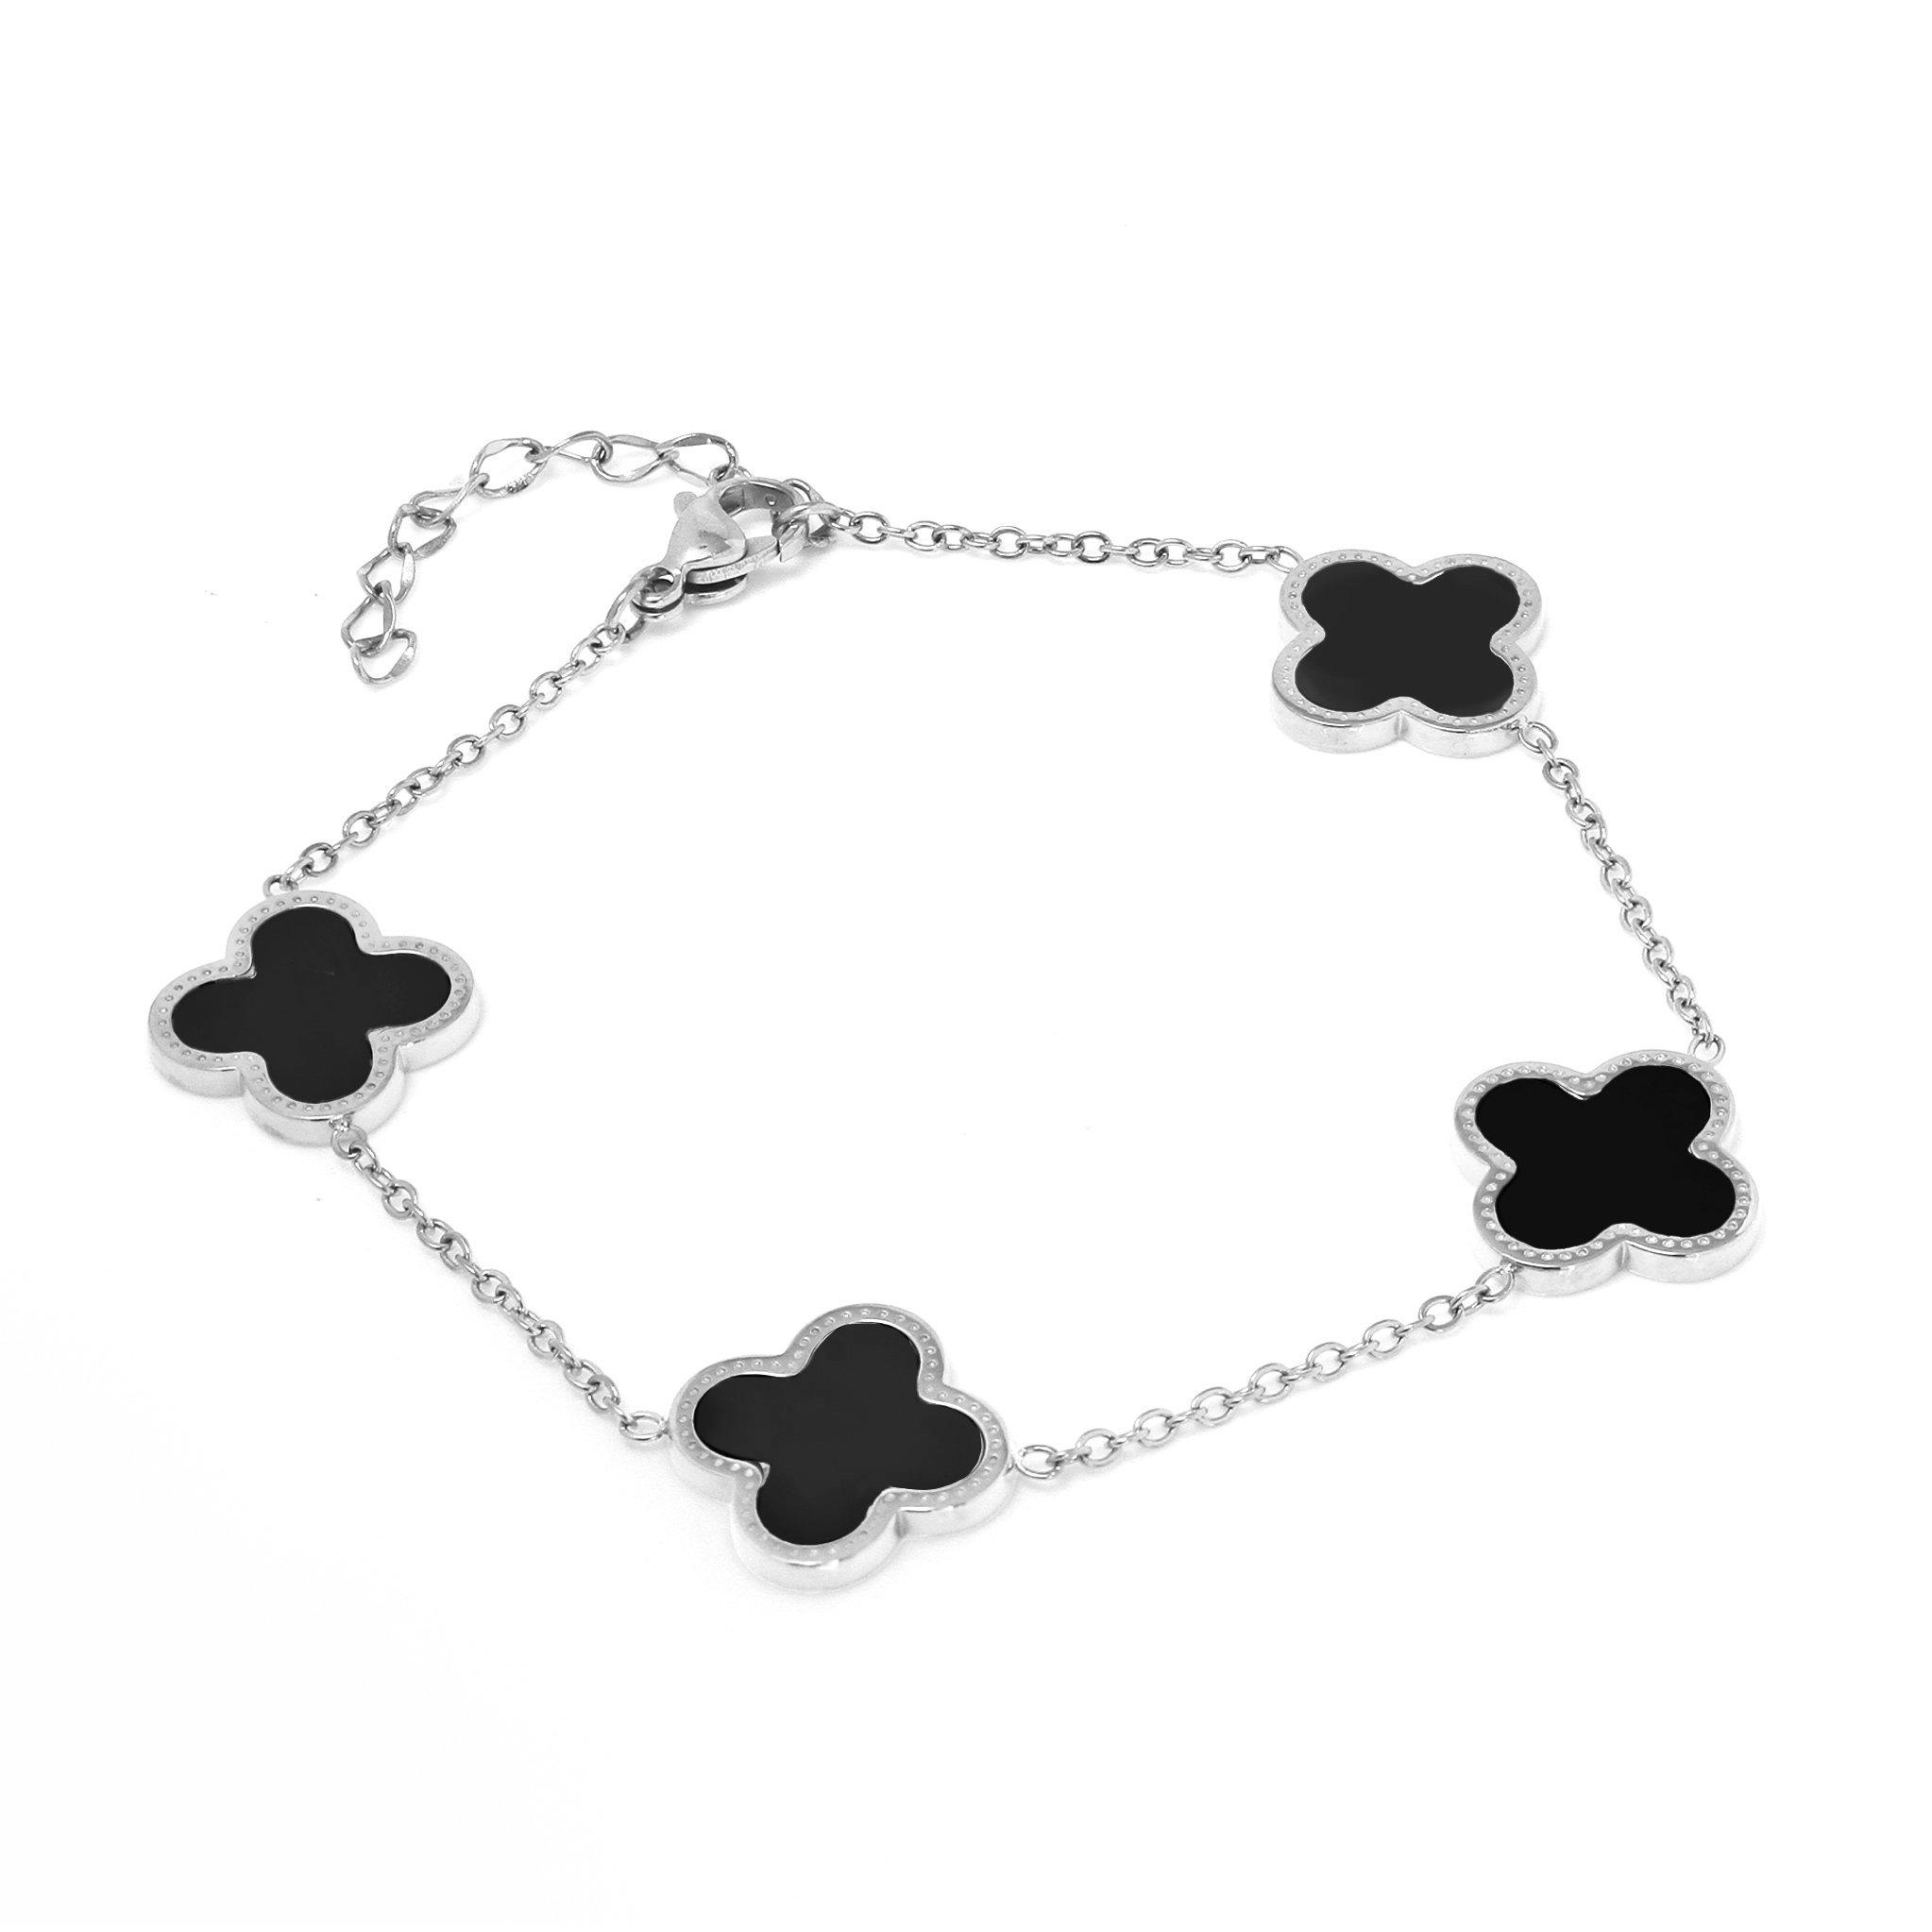 Luck Bracelet Silver And Black